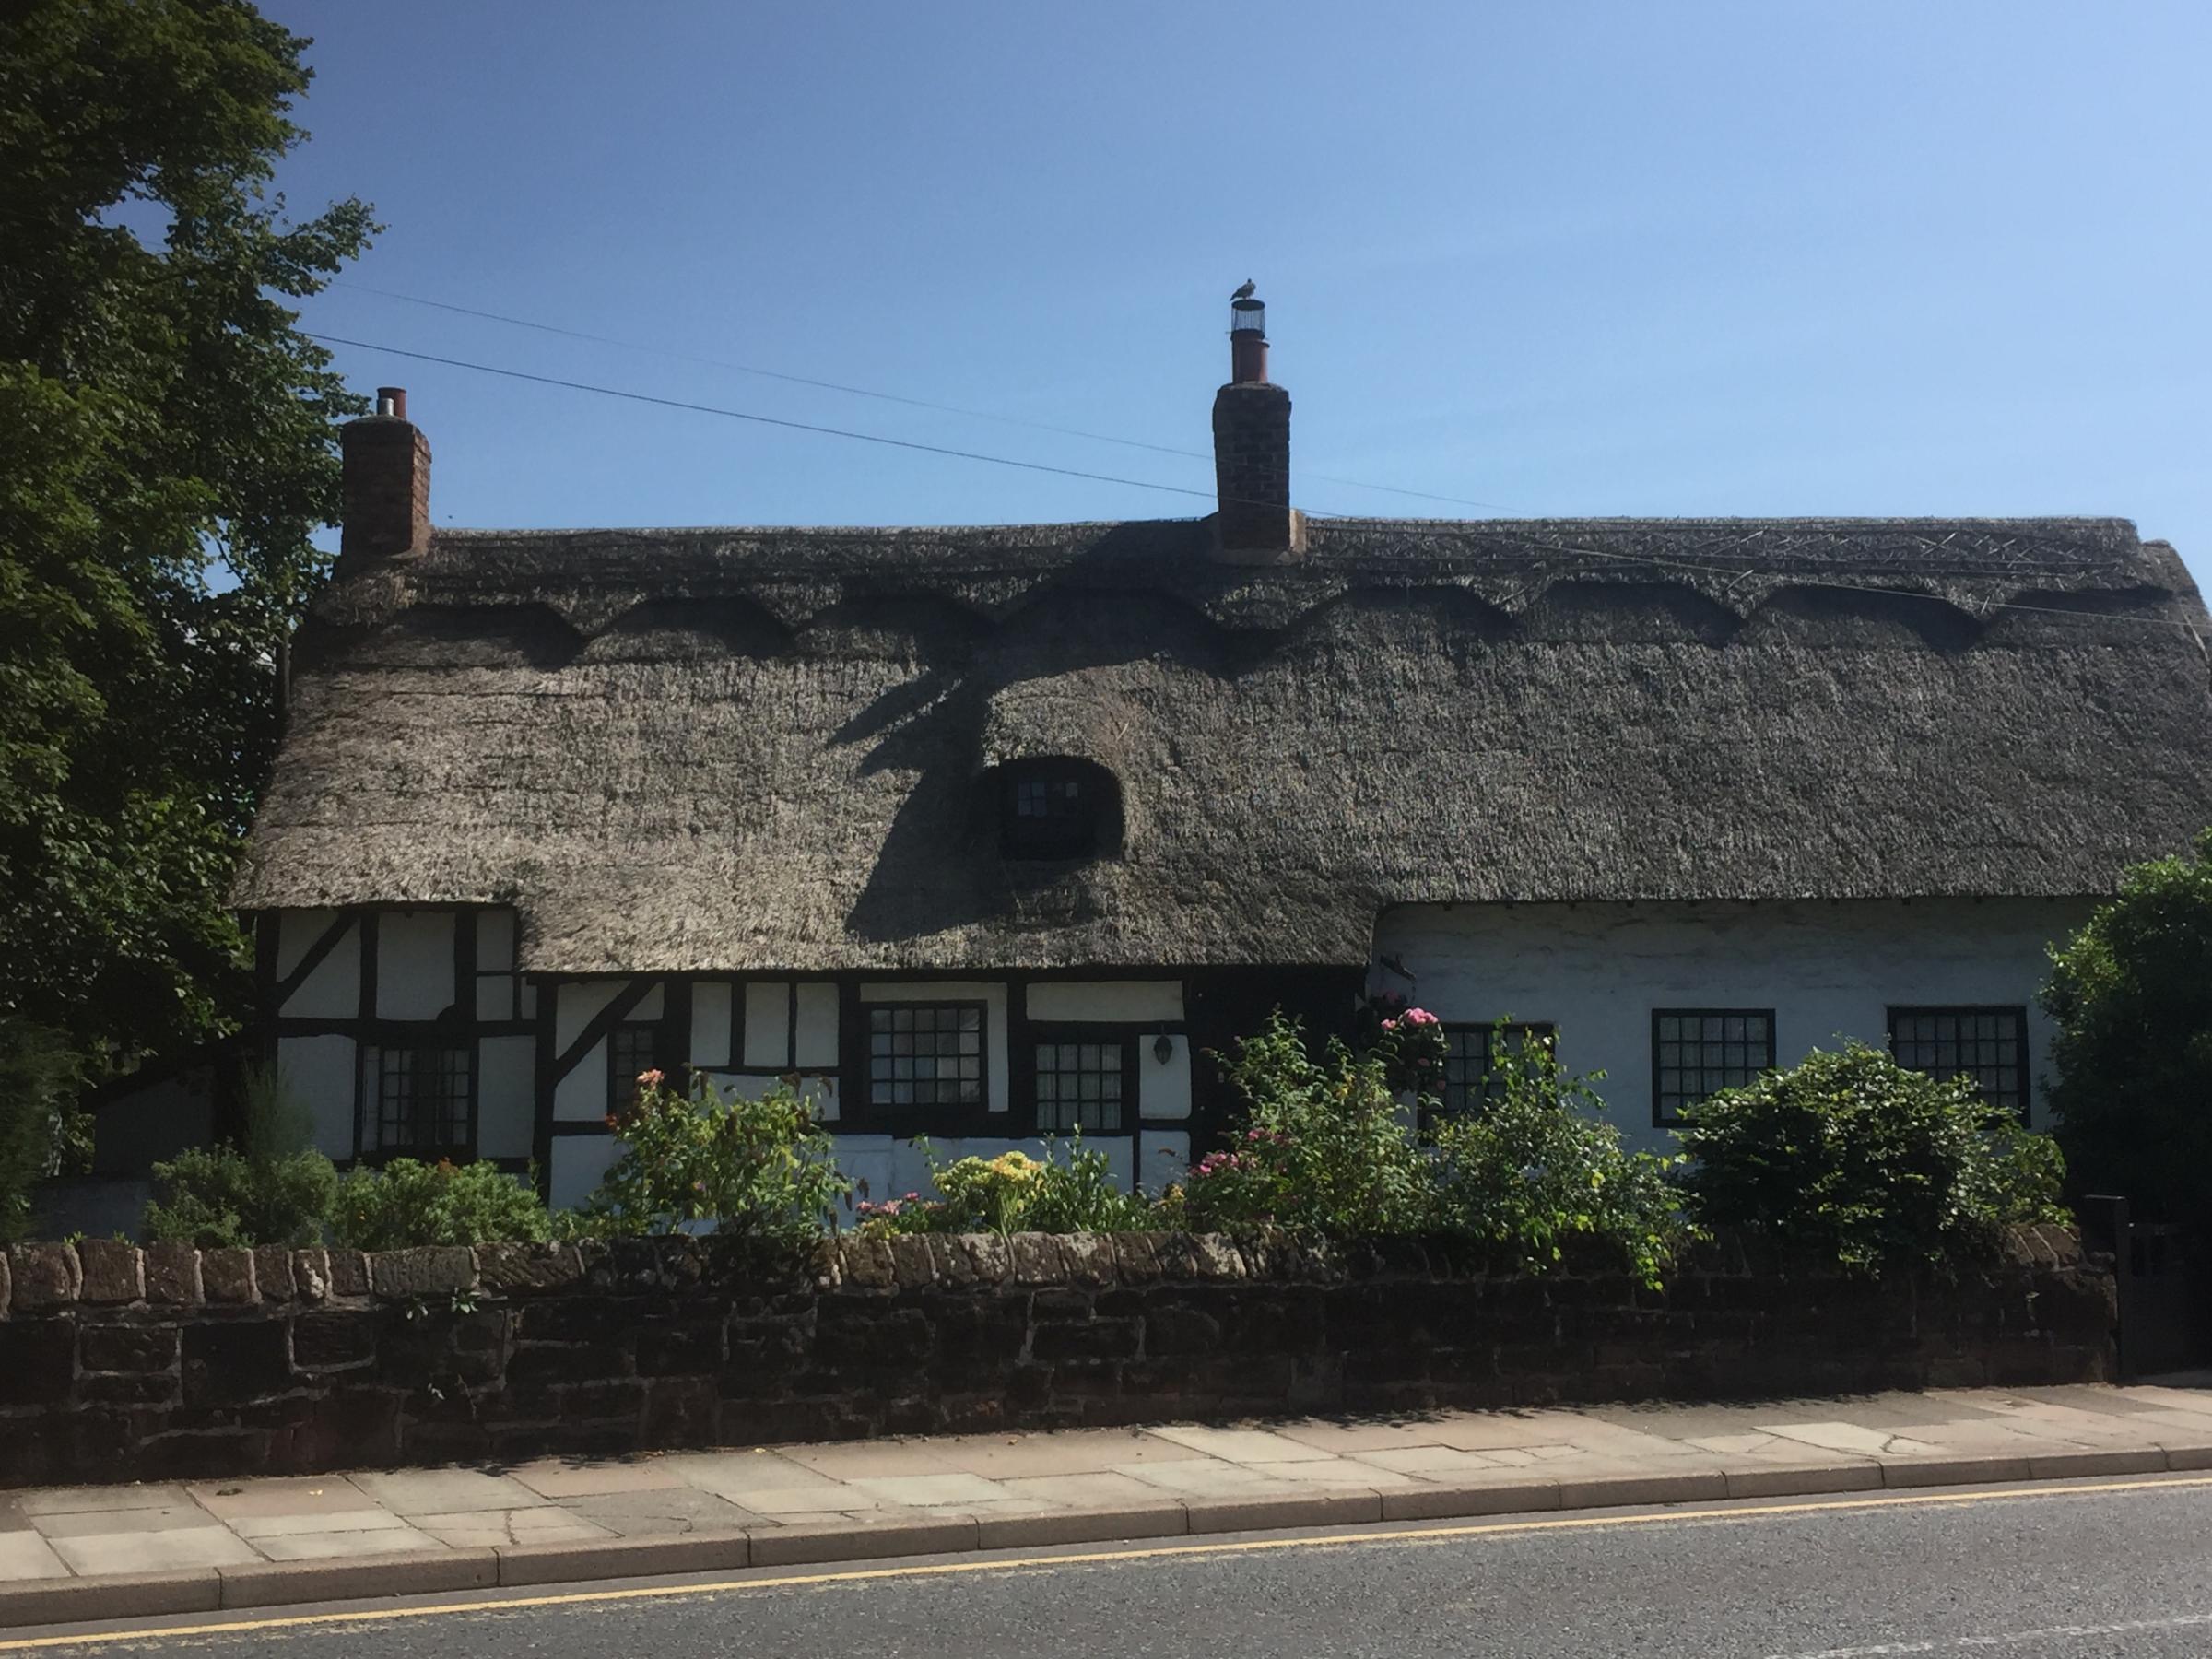 The beautiful thatched cottage in Bebington is still standing and lived in today